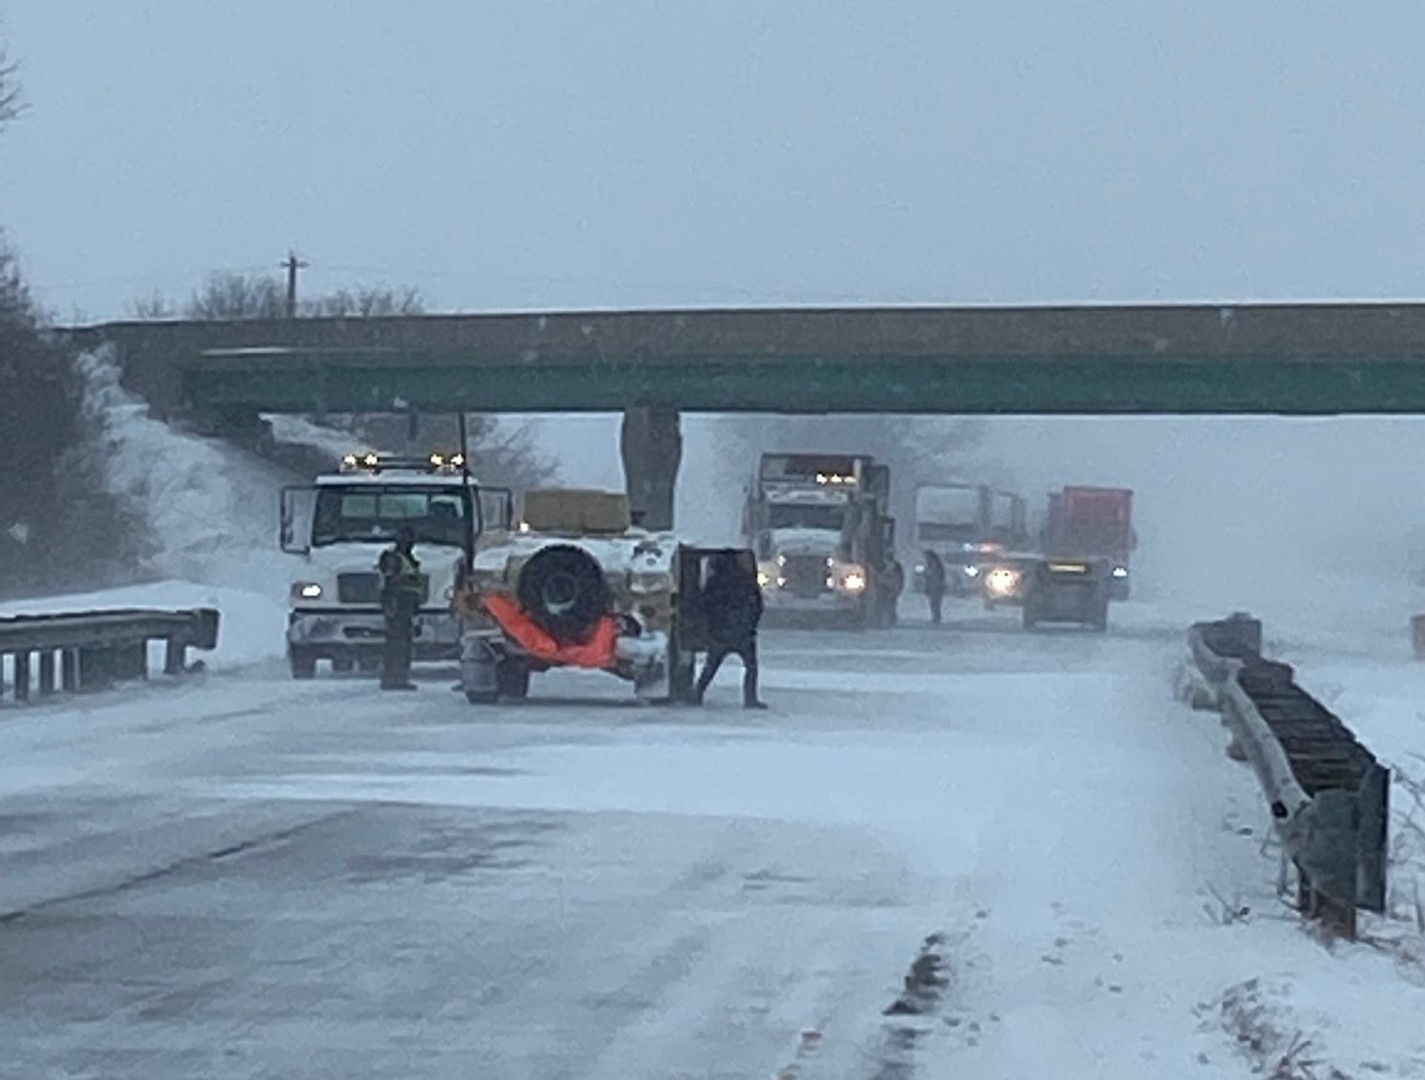 Soldiers from the Illinois Army National Guard’s Troop A, 2nd Battalion, 106th Cavalry Regiment, based in Pontiac, assist the Illinois State Police during winter weather response operations Feb. 3 in the Champaign area.